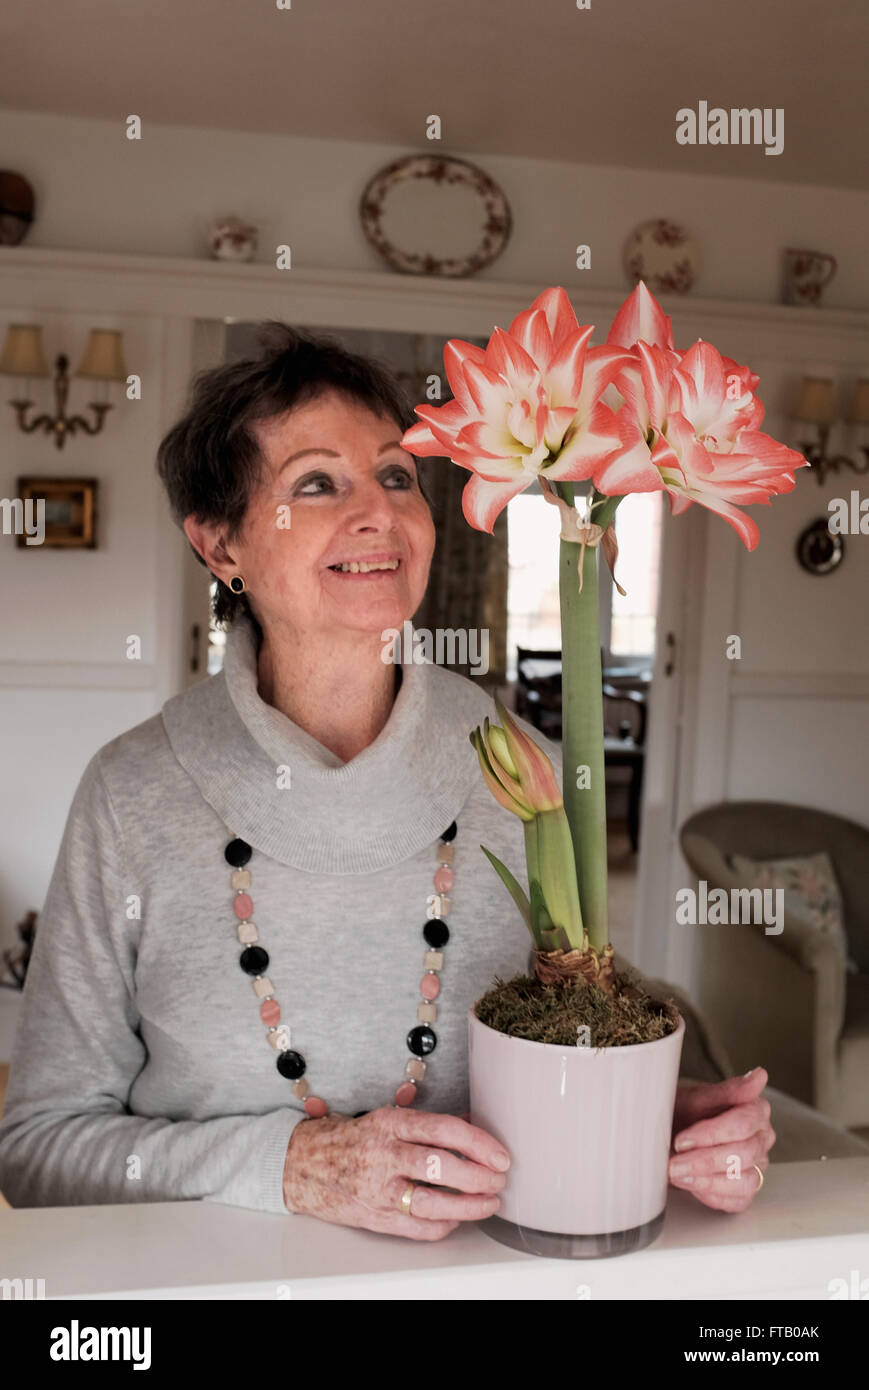 Elderly woman admires her quadruple headed red Amaryllis pot plant at home Stock Photo